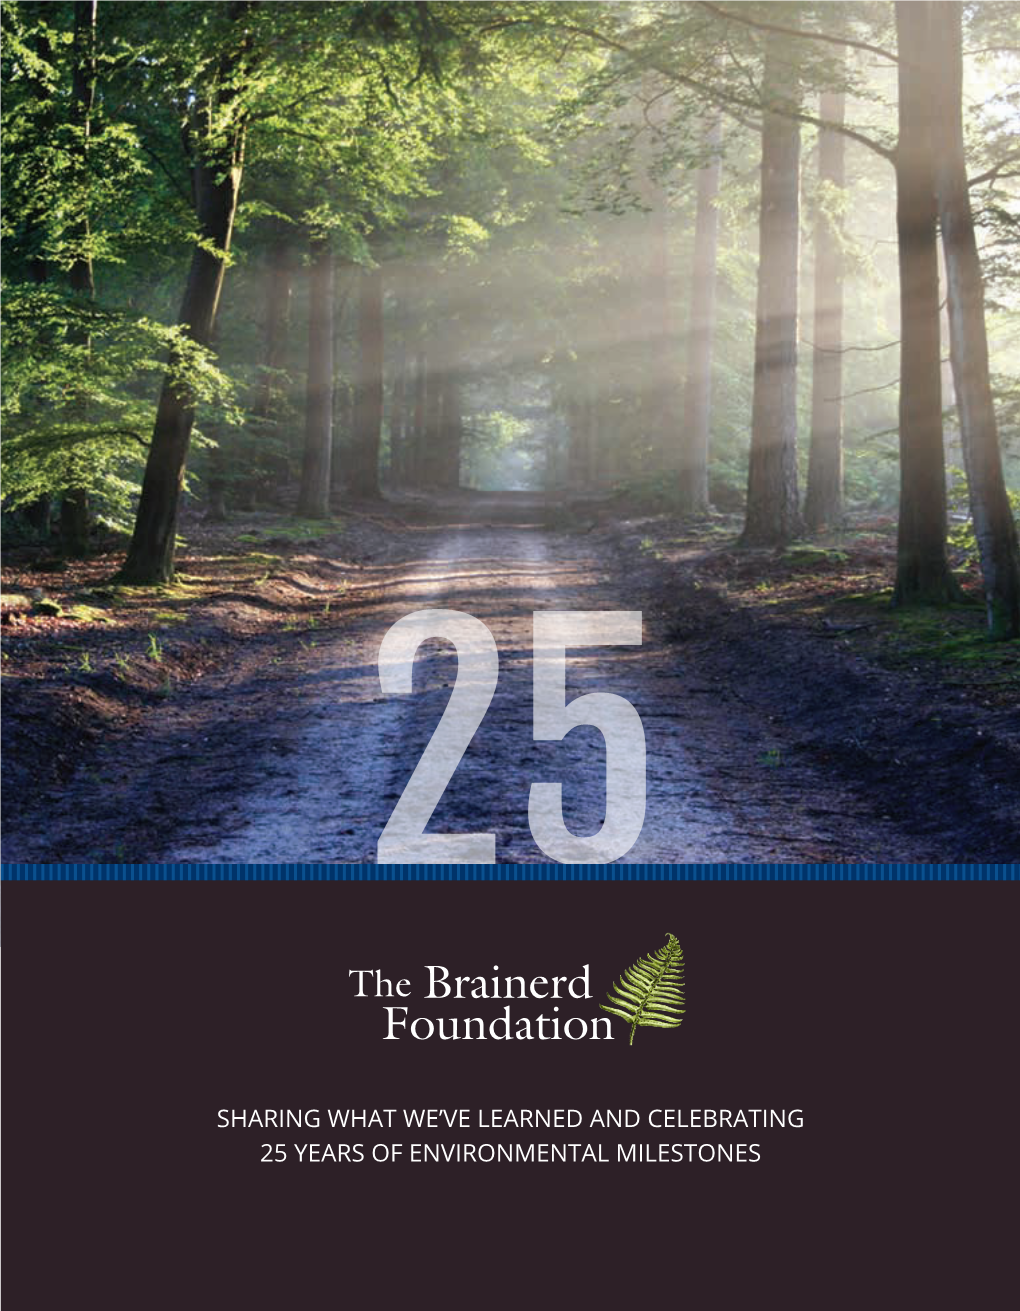 Sharing What We've Learned and Celebrating 25 Years of Environmental Milestones